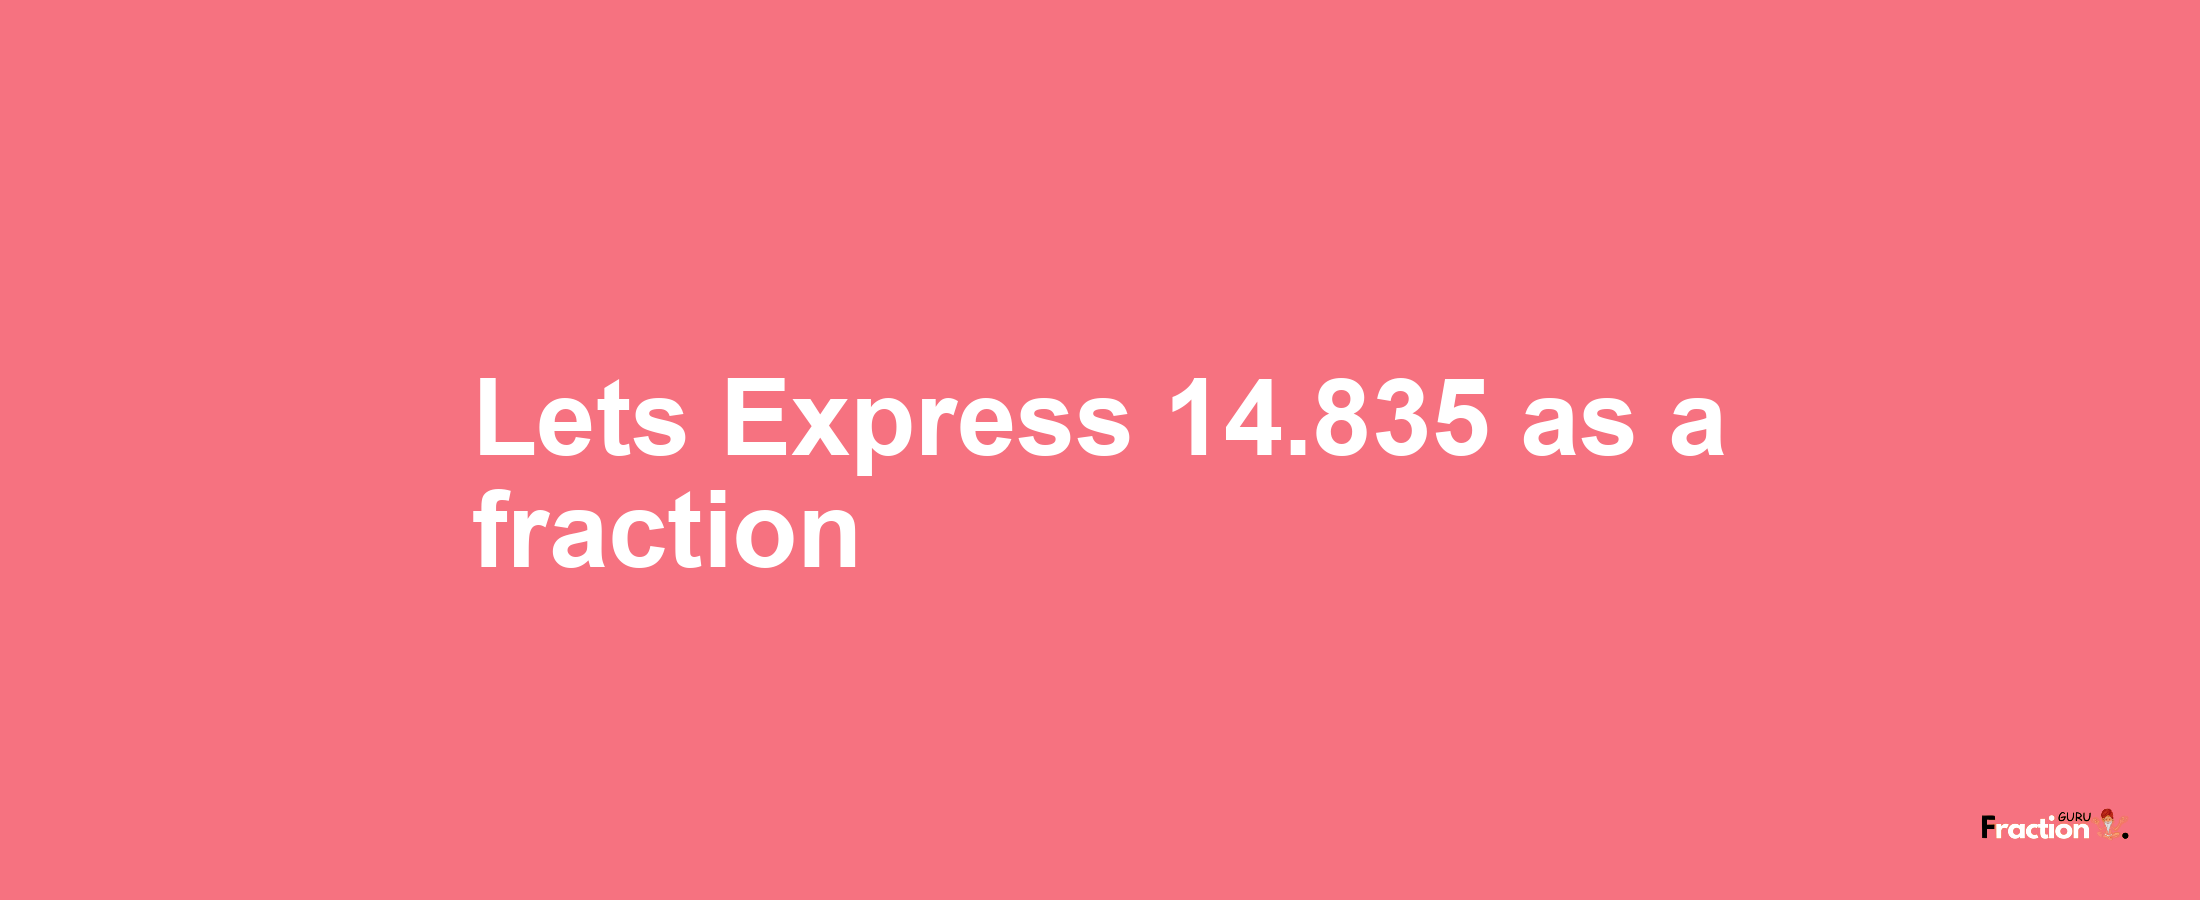 Lets Express 14.835 as afraction